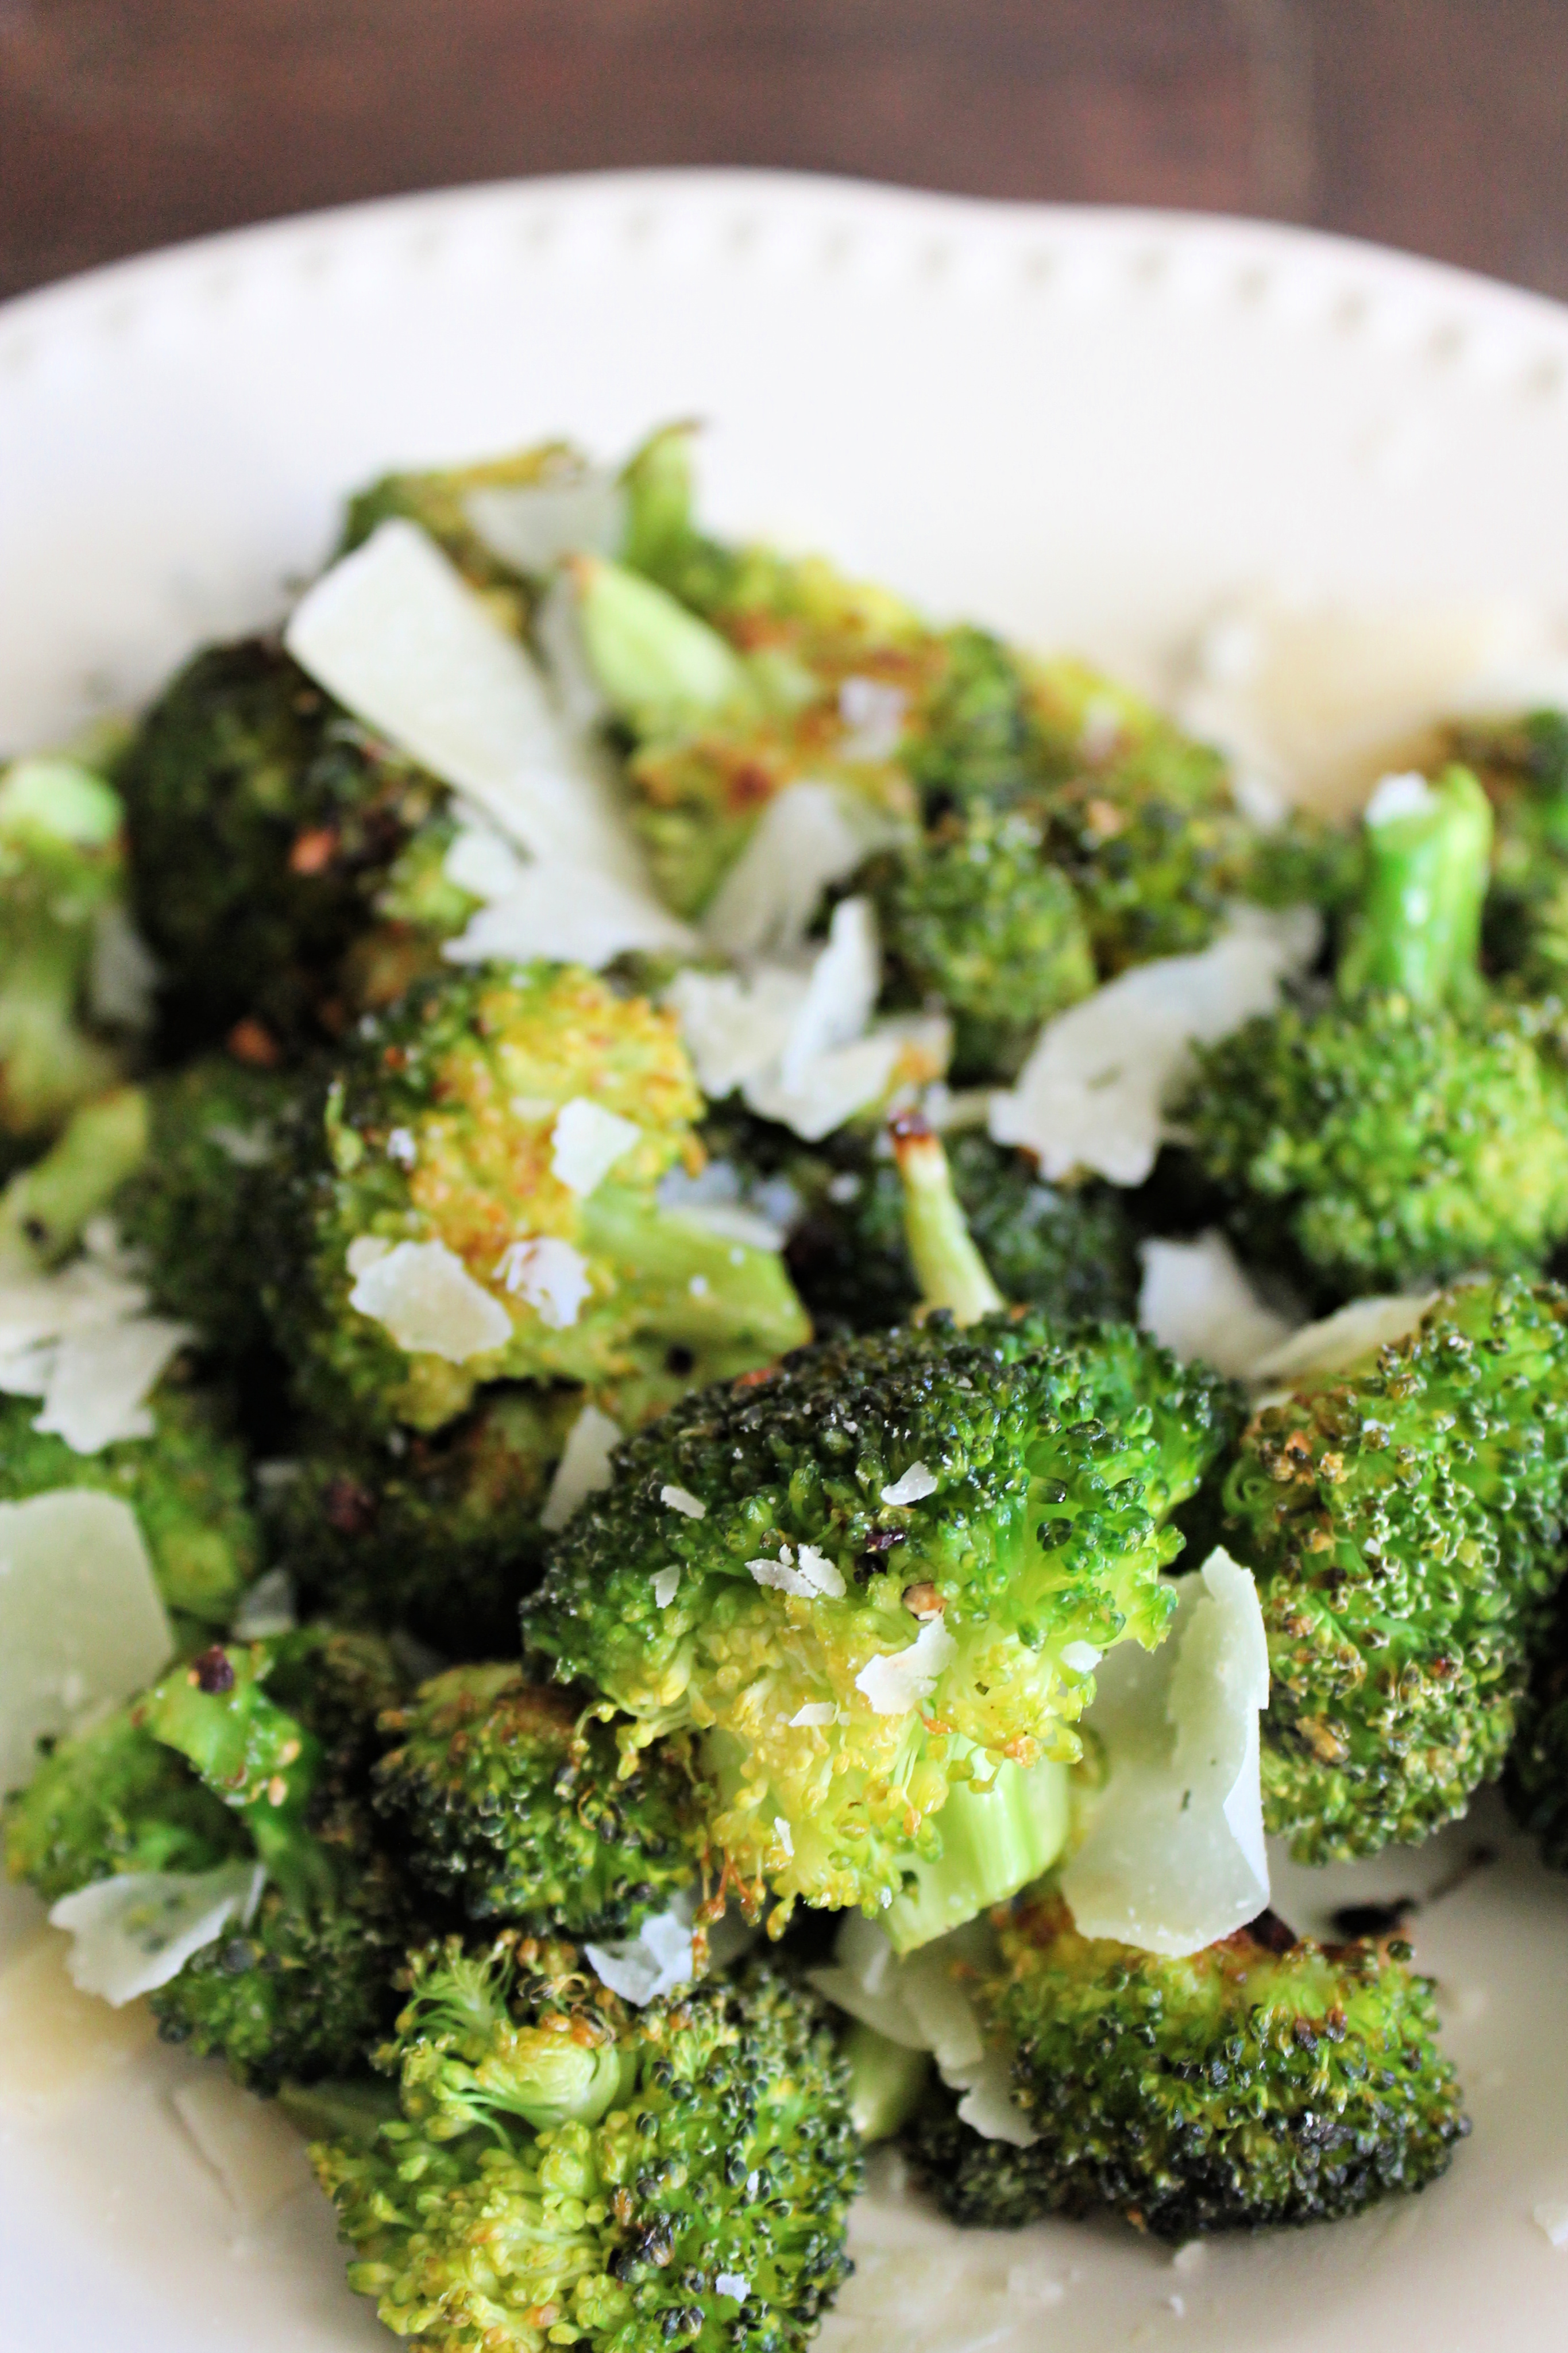 how to roast broccoli in the oven